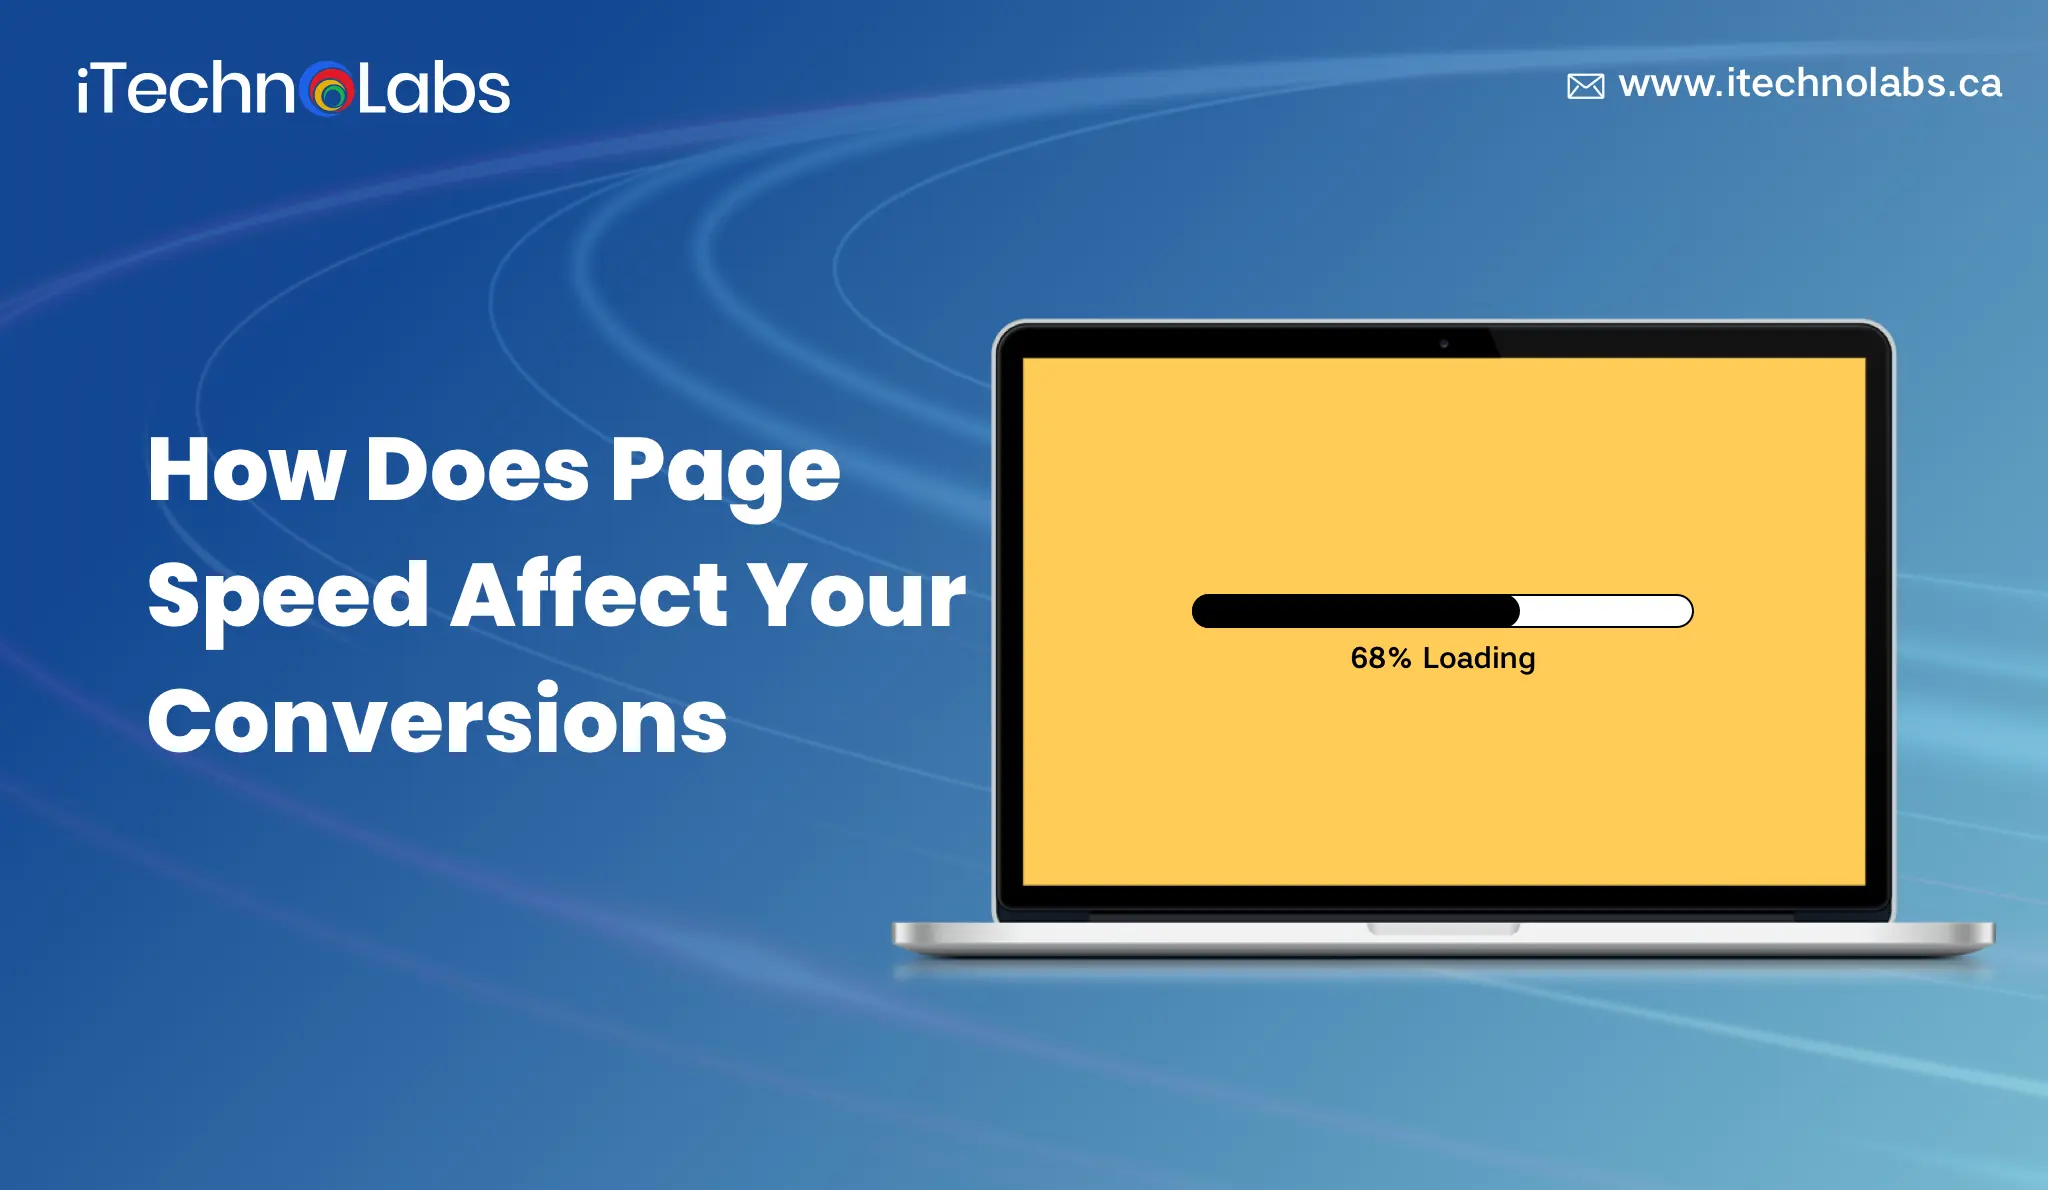 Page Speed Affect Your Conversions